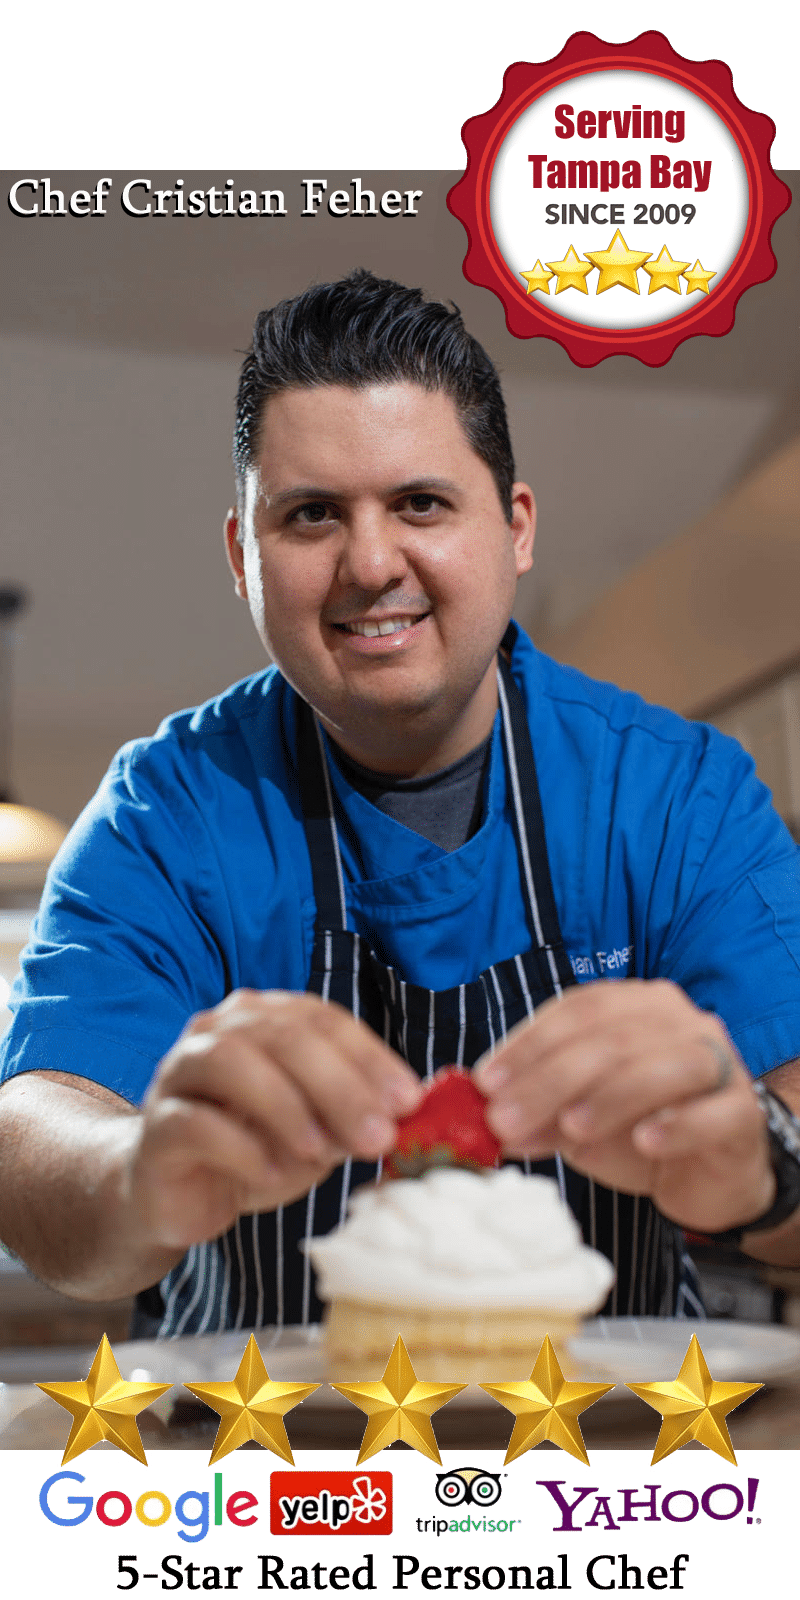 Tampa Bay's highest rated private personal chef